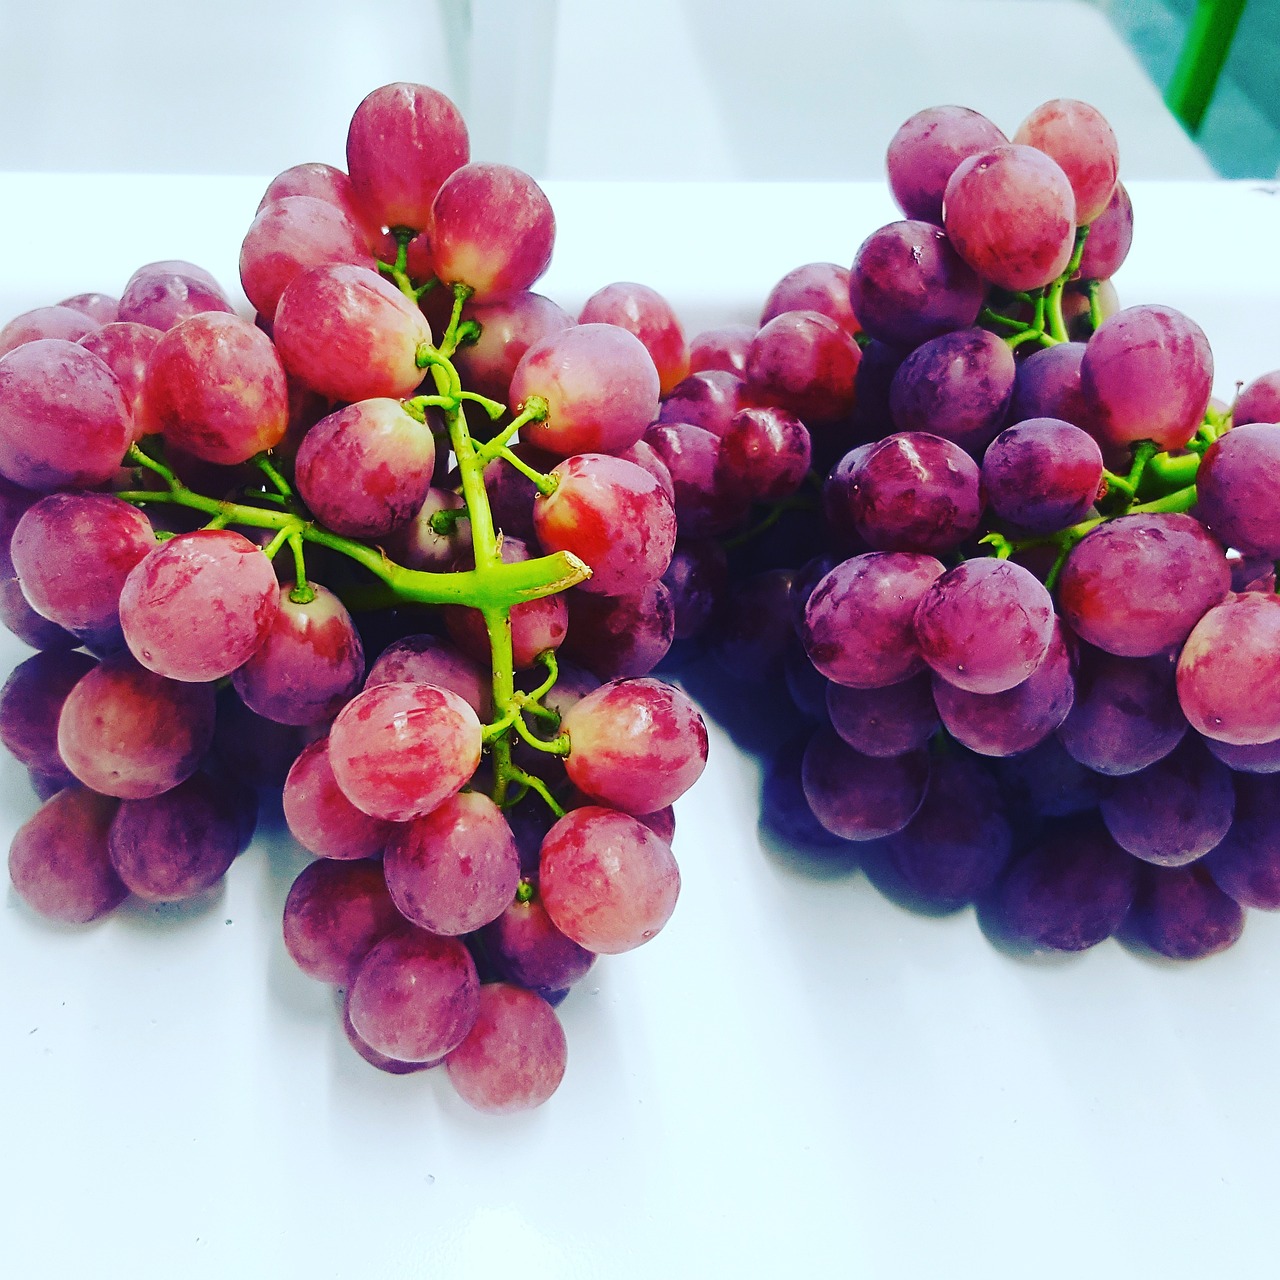 seedless red grapes free photo